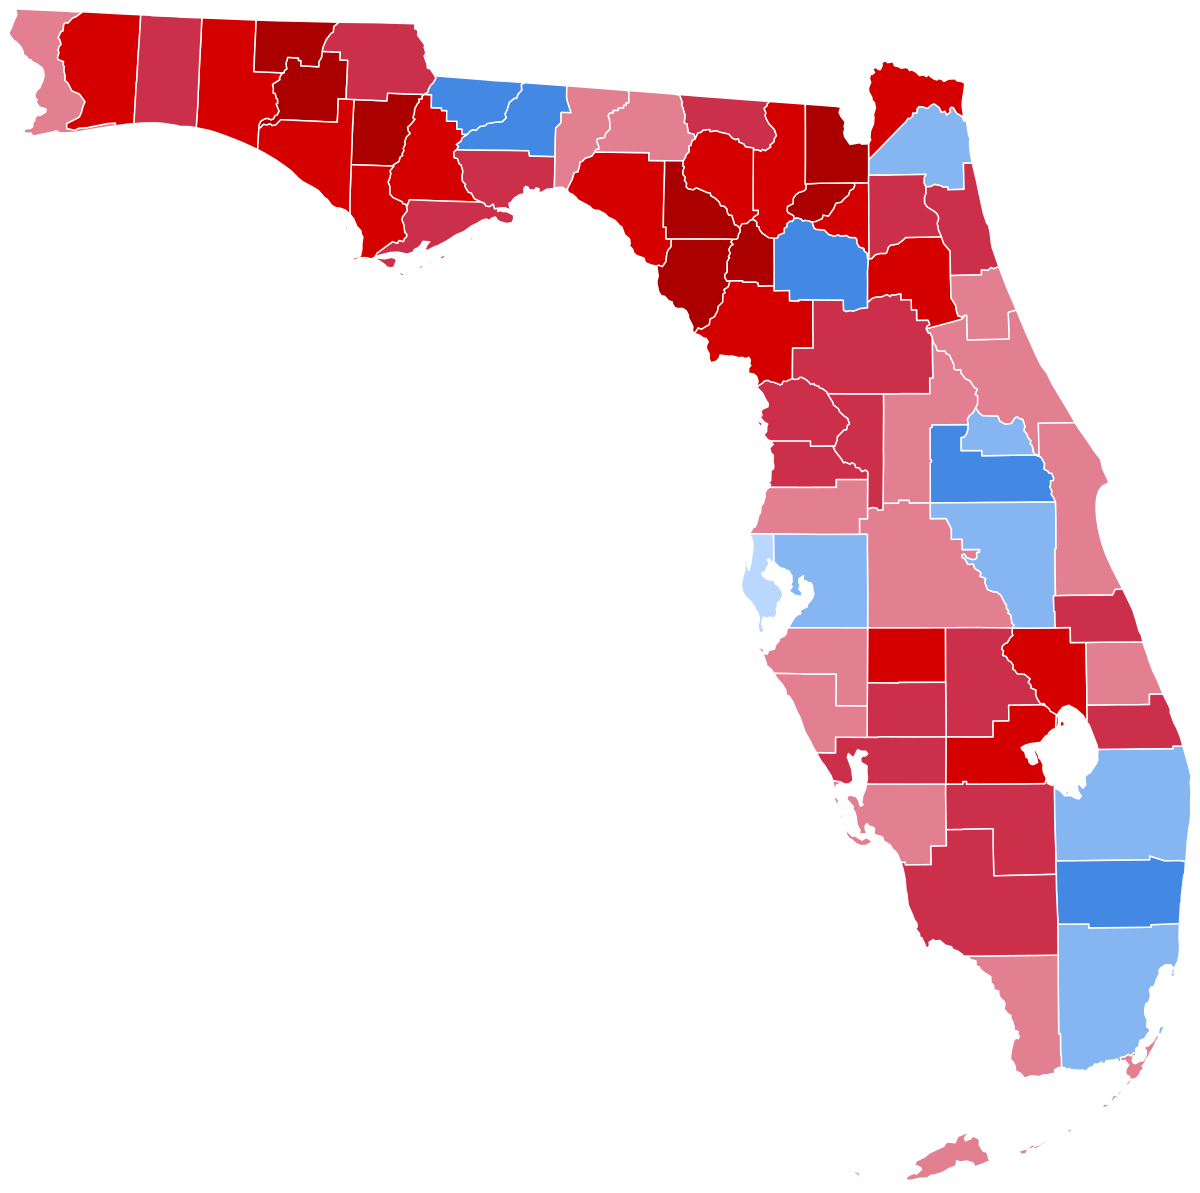 2020 united states presidential election in florida